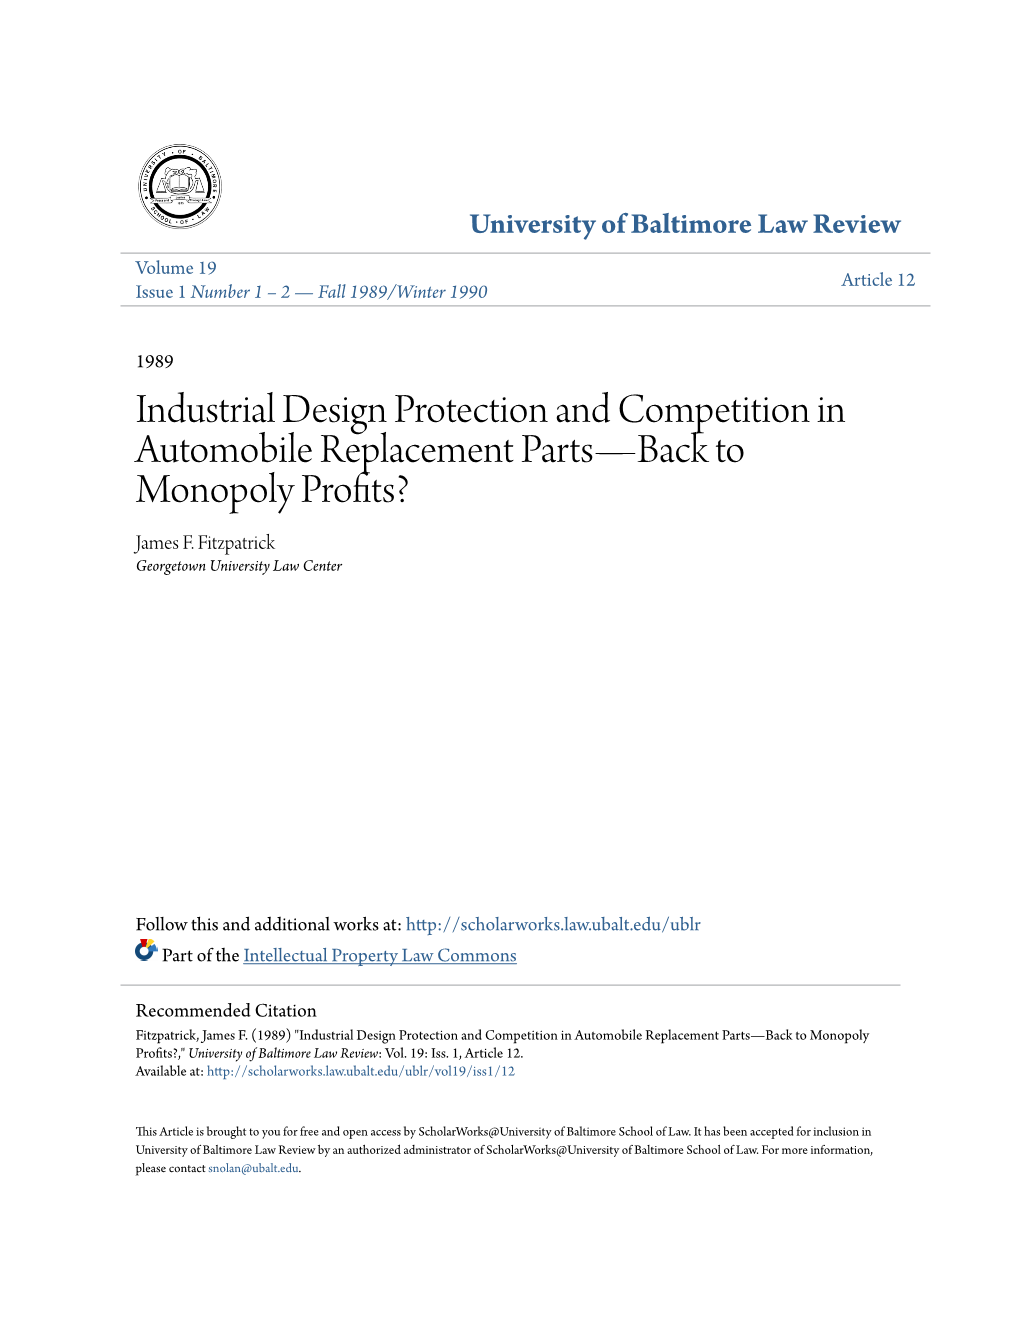 Industrial Design Protection and Competition in Automobile Replacement Partsâ•Flback to Monopoly Profits?